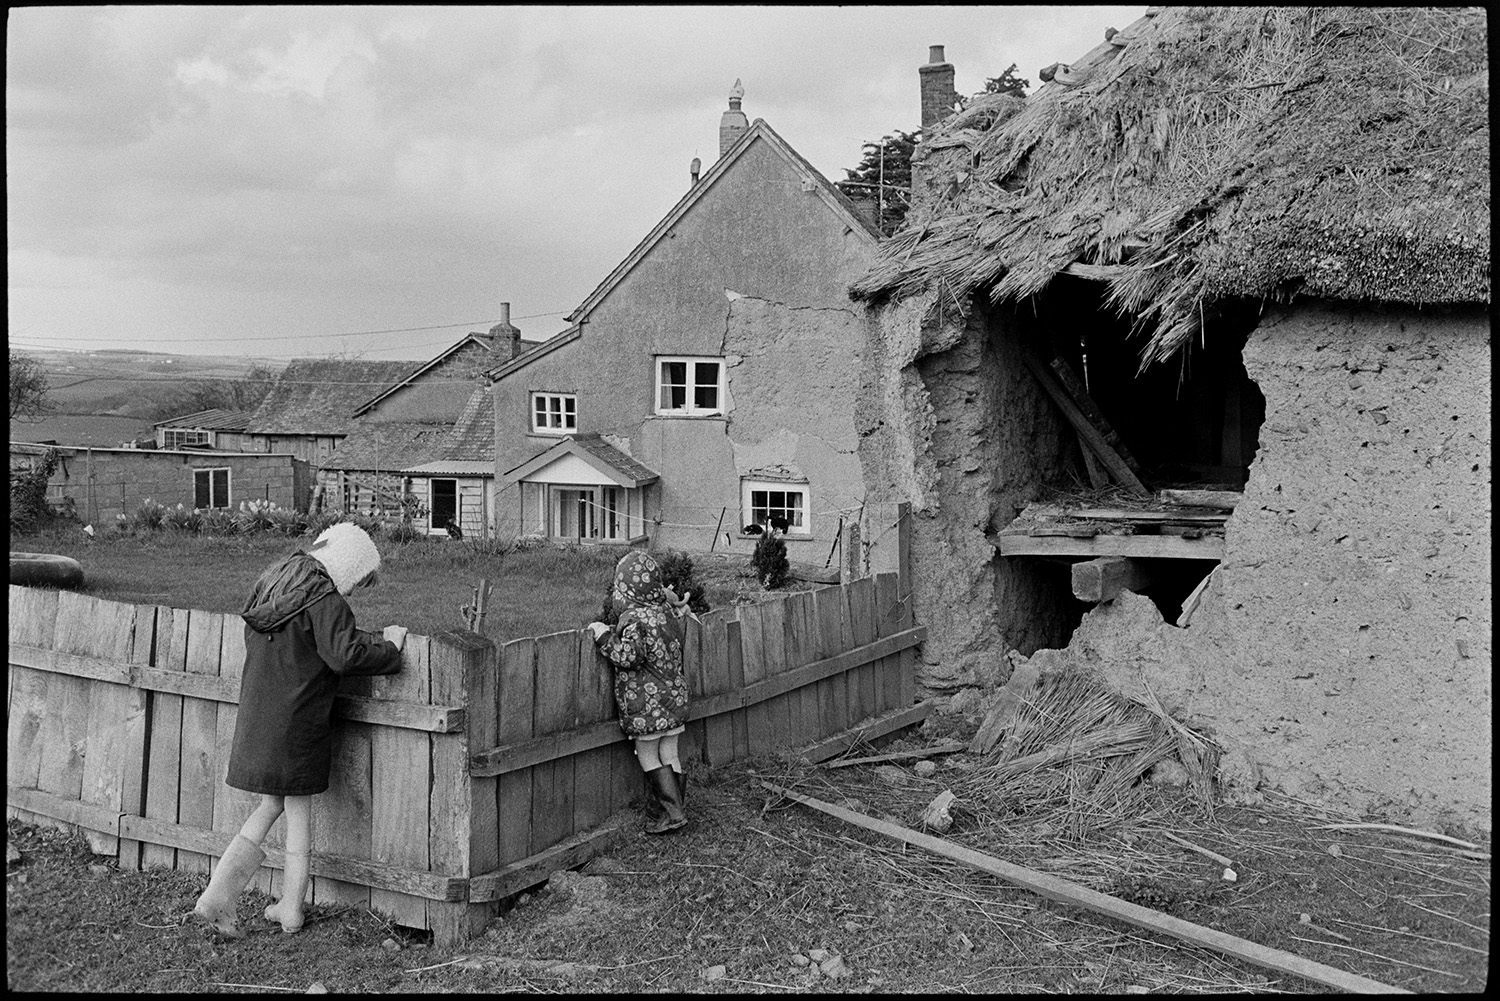 Cob and thatch barn, collapsing. 
[Two children playing by a collapsing cob and thatch barn at Higher House Farm, Atherington. They are looking over a wooden fence to the farmhouse and garden.]